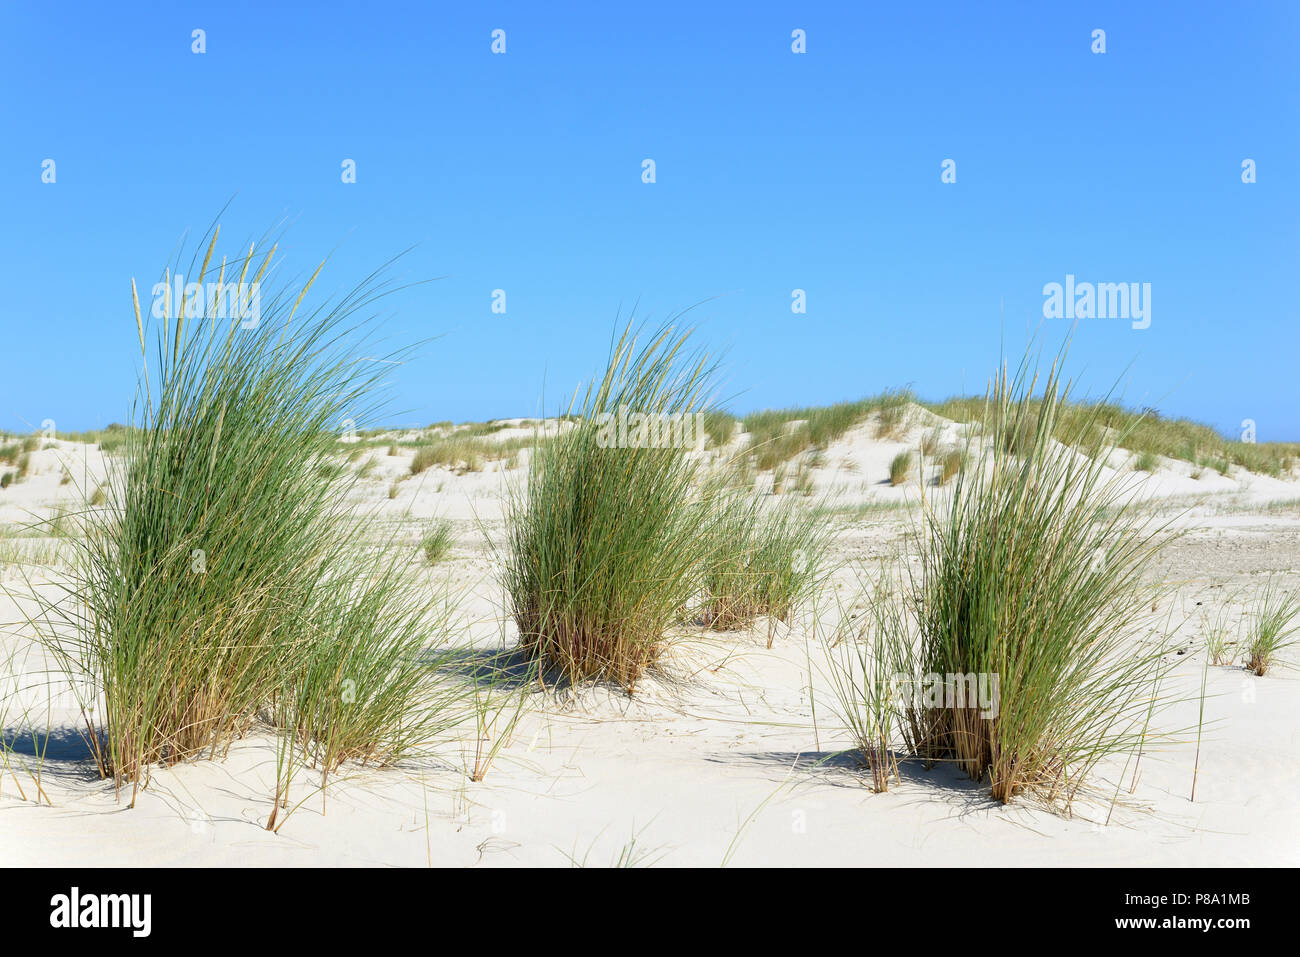 Marram Grass (Ammophila arenaria), single tufts in the dunes, Norderney, East Frisian Islands, North Sea, Lower Saxony, Germany Stock Photo